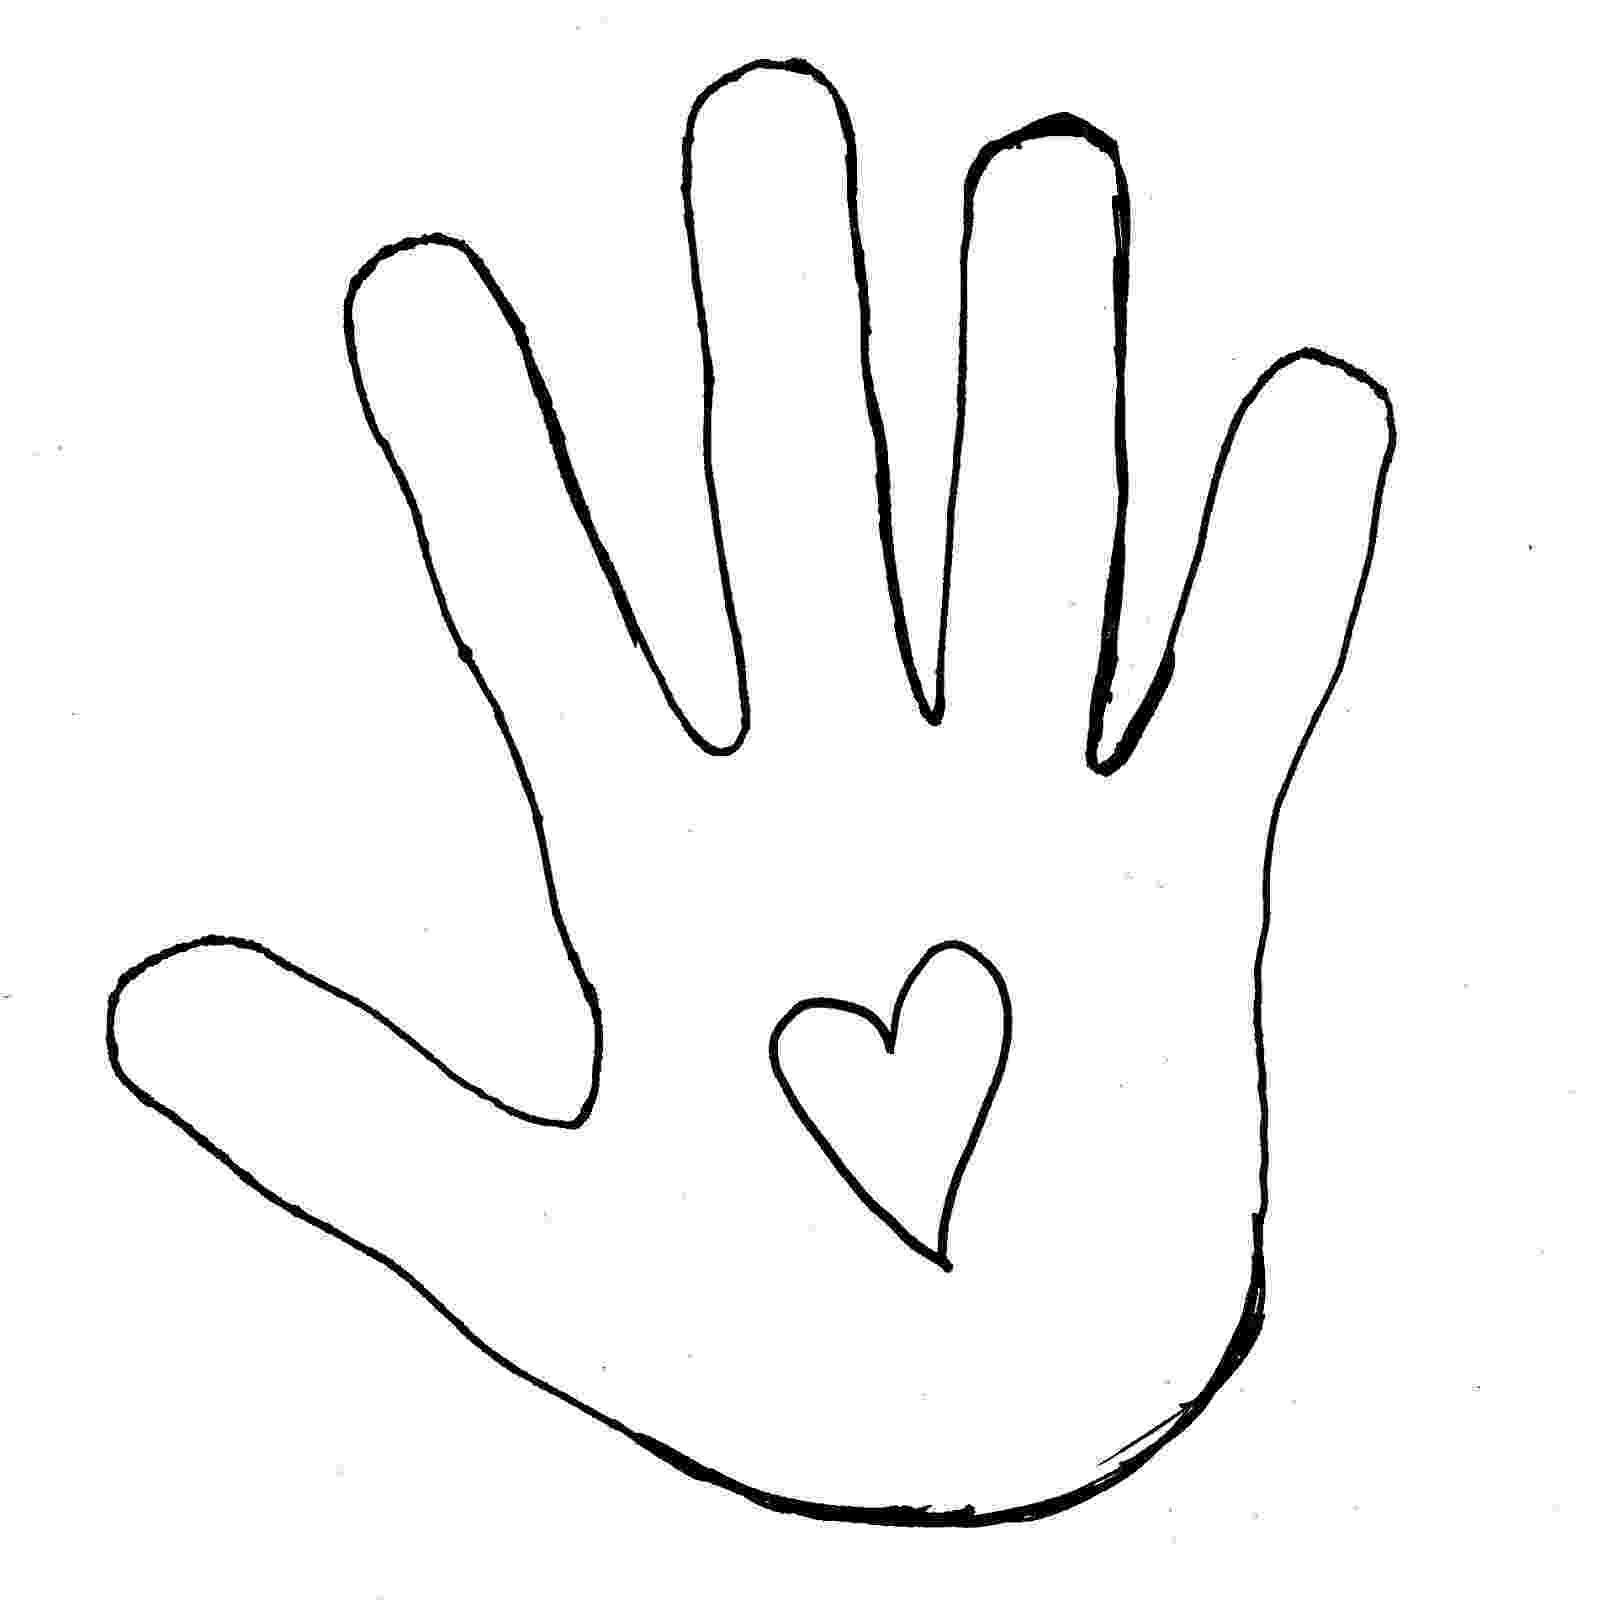 helping hands coloring page helping others coloring pages at getcoloringscom free page helping coloring hands 